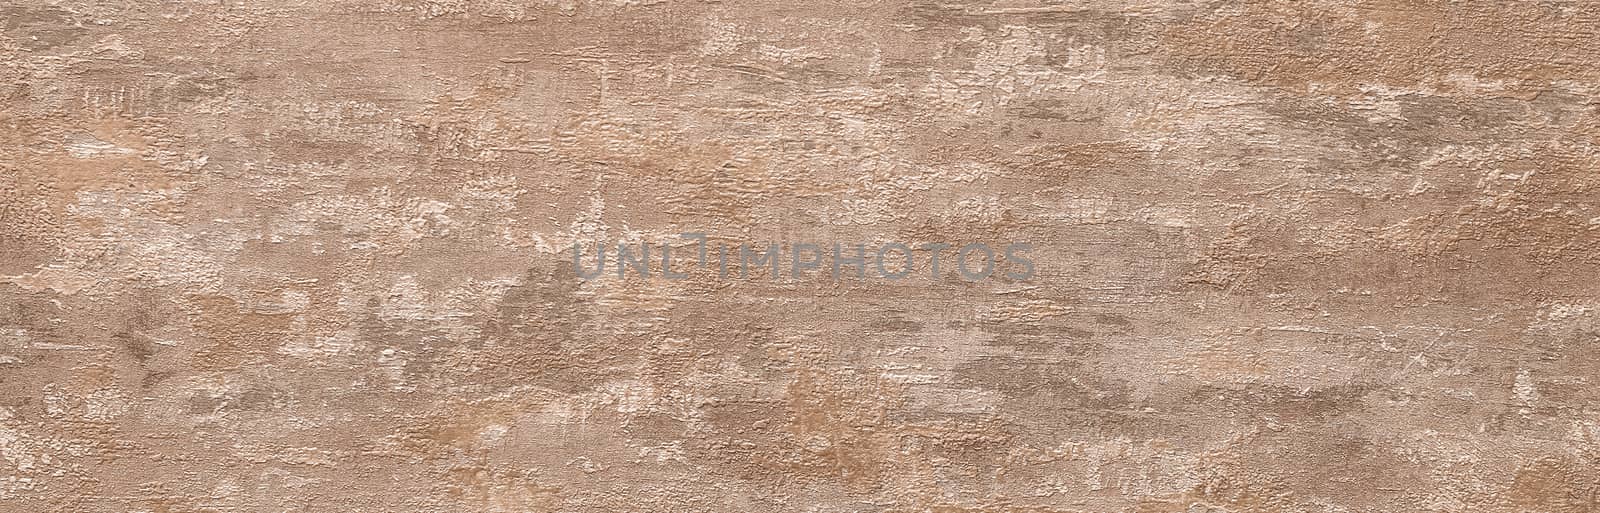 brown mottled paper texture, can be used for background by bonilook